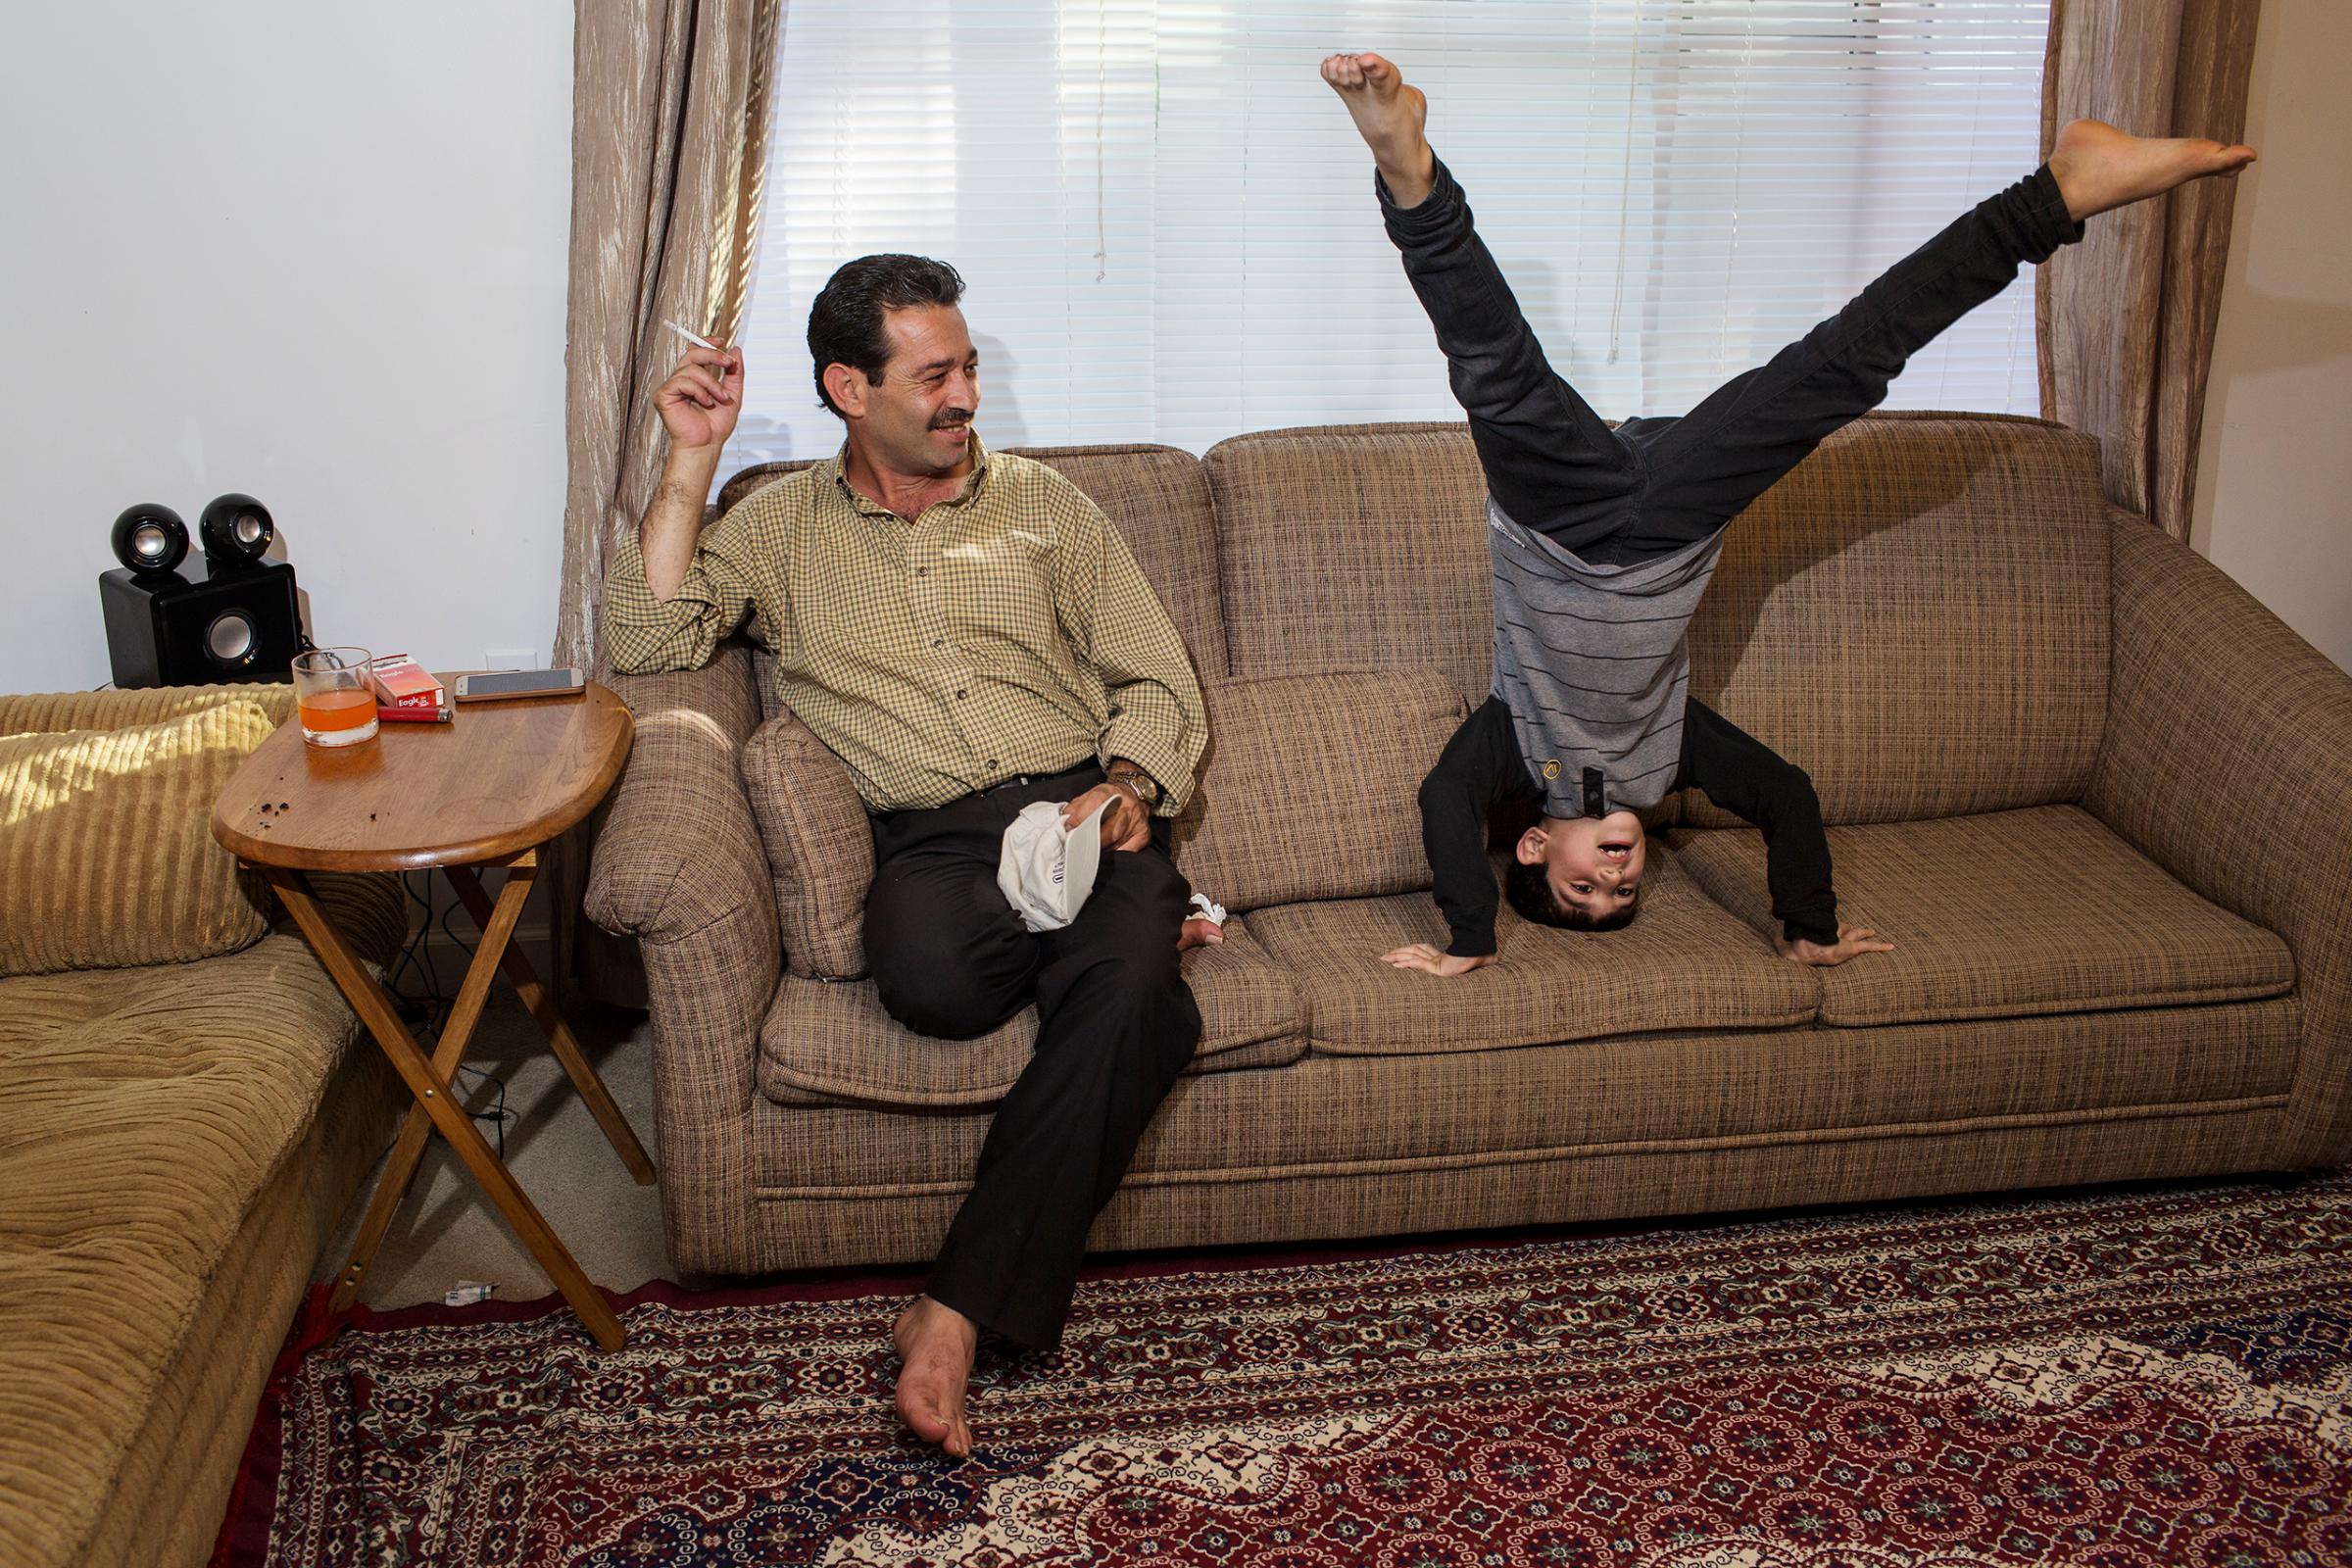 Mutaz Tameem, 6, plays inside the family's apartment in Des Moines, Iowa, while his father, Abdul Fattah, looks on.